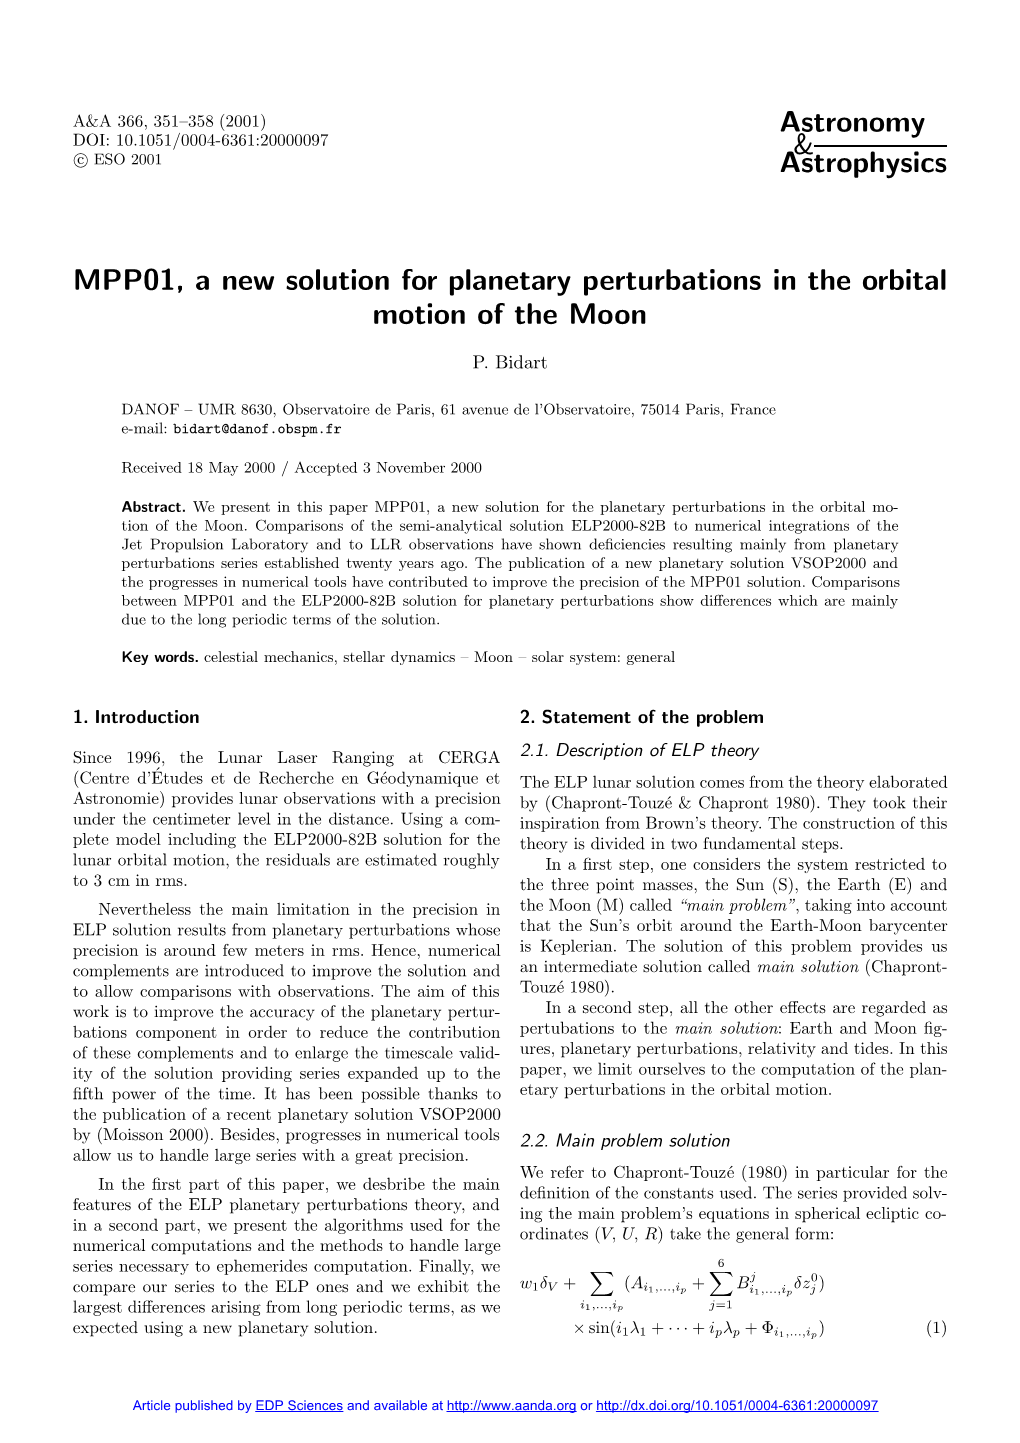 MPP01, a New Solution for Planetary Perturbations in the Orbital Motion of the Moon